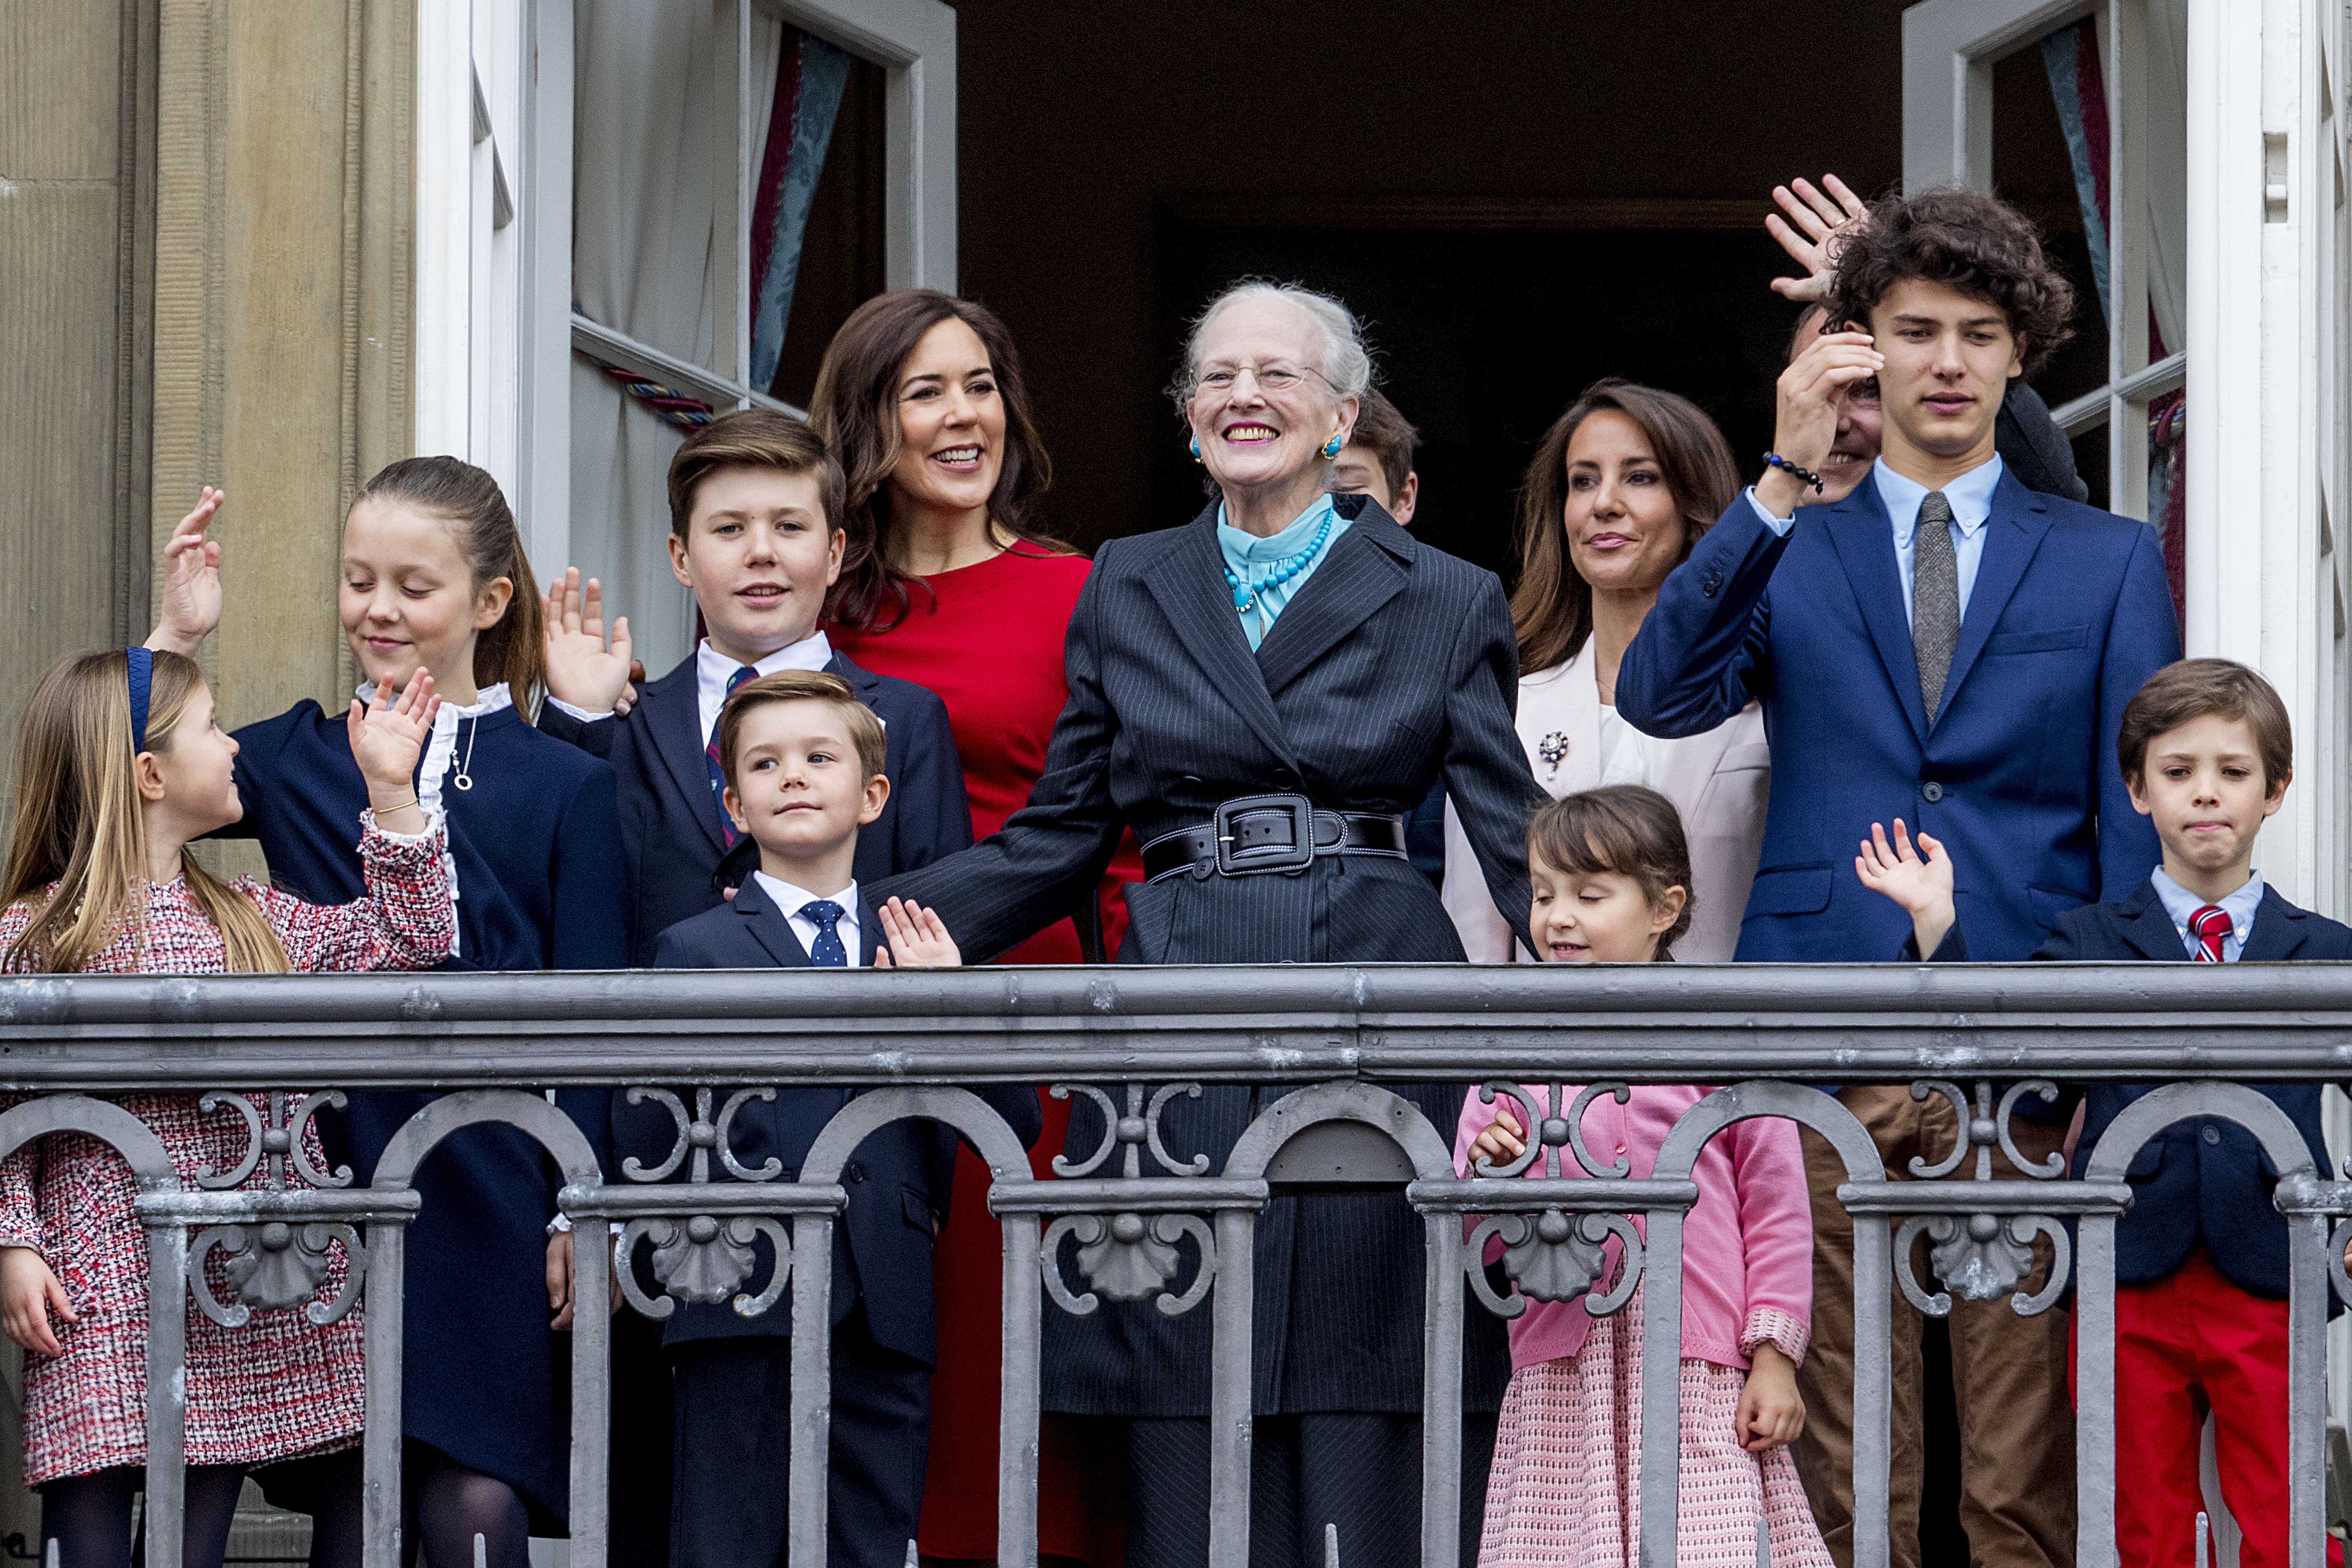 Queen Margrethe of Denmark, Crown Princess Mary of Denmark, Prince Christian of Denmark, Princess Isabella of Denmark, Prince Vincent of Denmark, Princess Josephine, Prince Joachim of Denmark, Princess Marie of Denmark, Prince Nikolai of Denmark, Prince Felix of Denmark, Prince Henrik of Denmark and Princess Athena of Denmark at the balcony of Amalienborg palace on April 16, 2018, in Copenhagen, Denmark. | Source: Getty Images